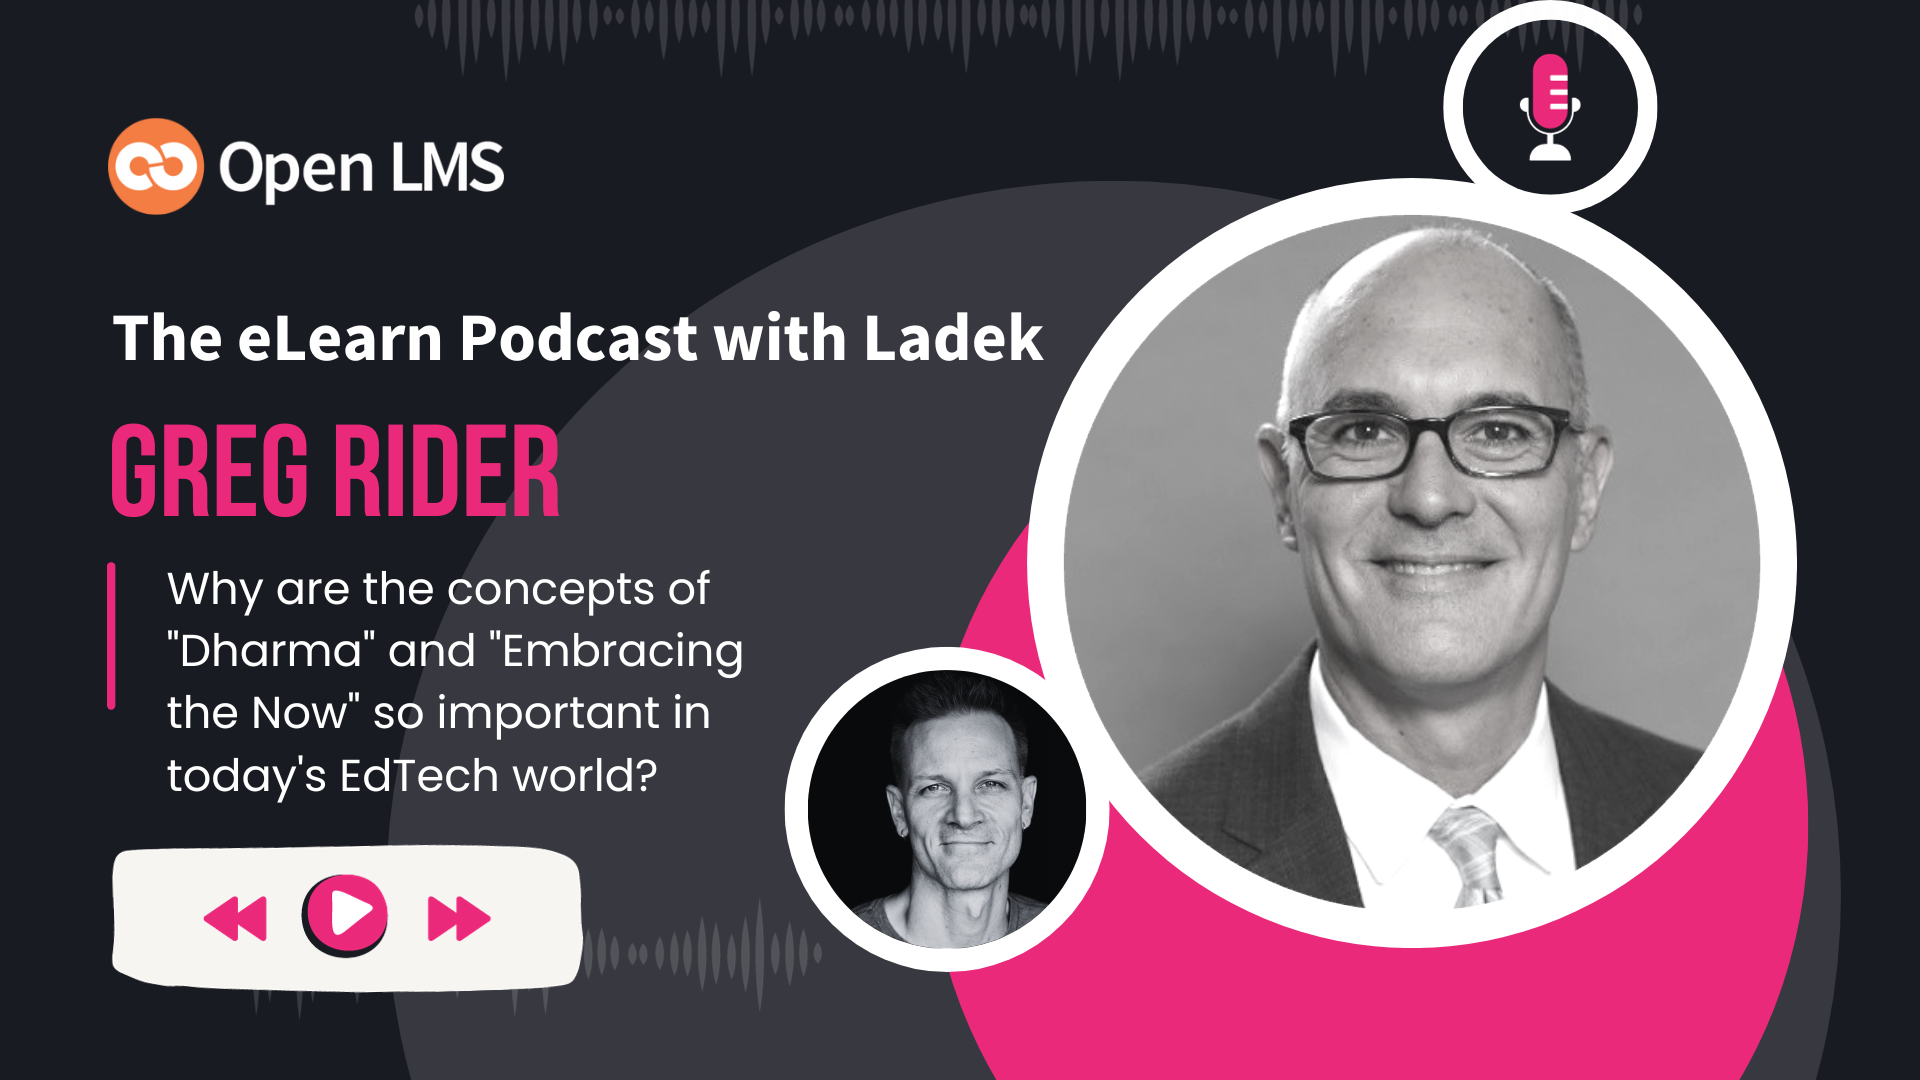 PODCAST eLearning Experts from all over the world chat with Ladek on the eLearn Podcast — Incredible stories, actionable tips, lifelong advice